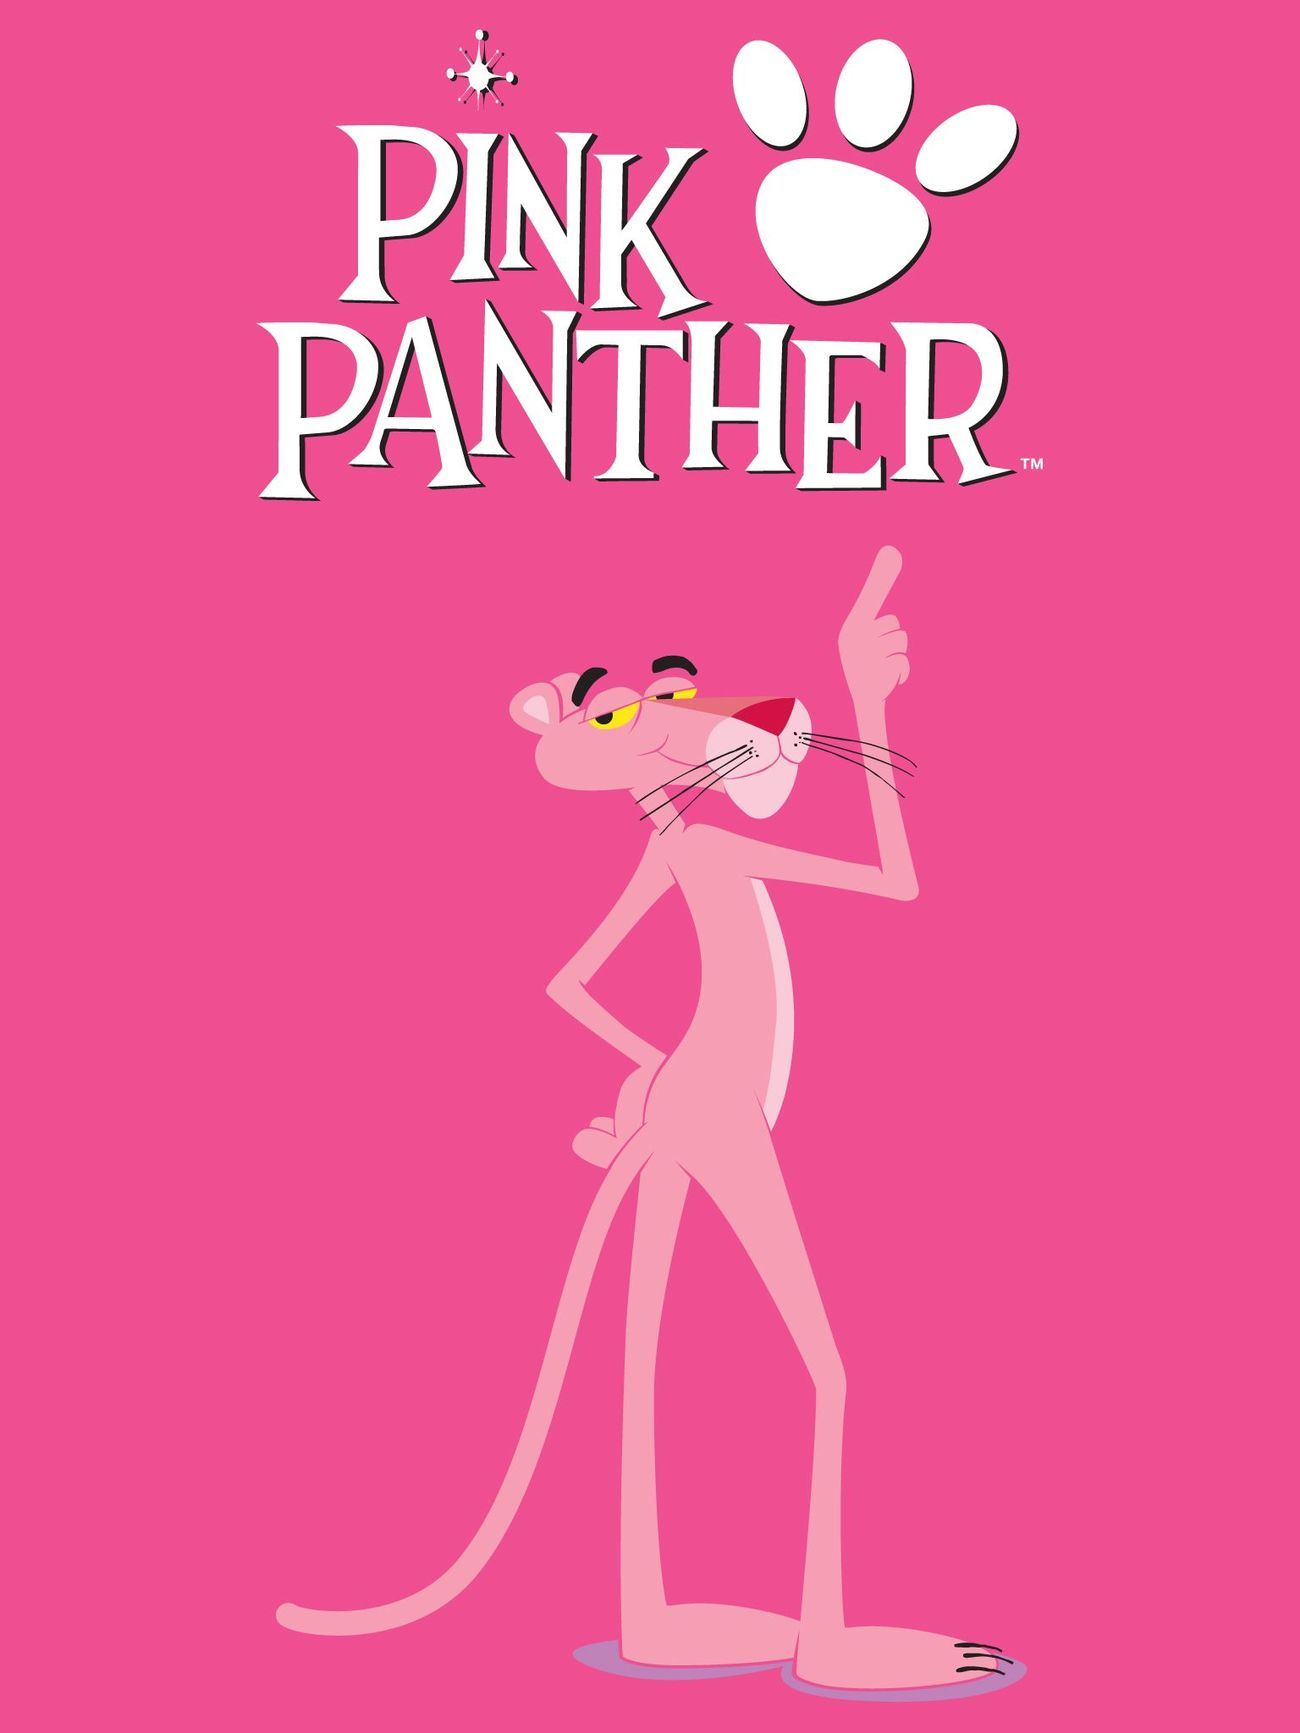 The pink panther is standing on a red background - Pink Panther